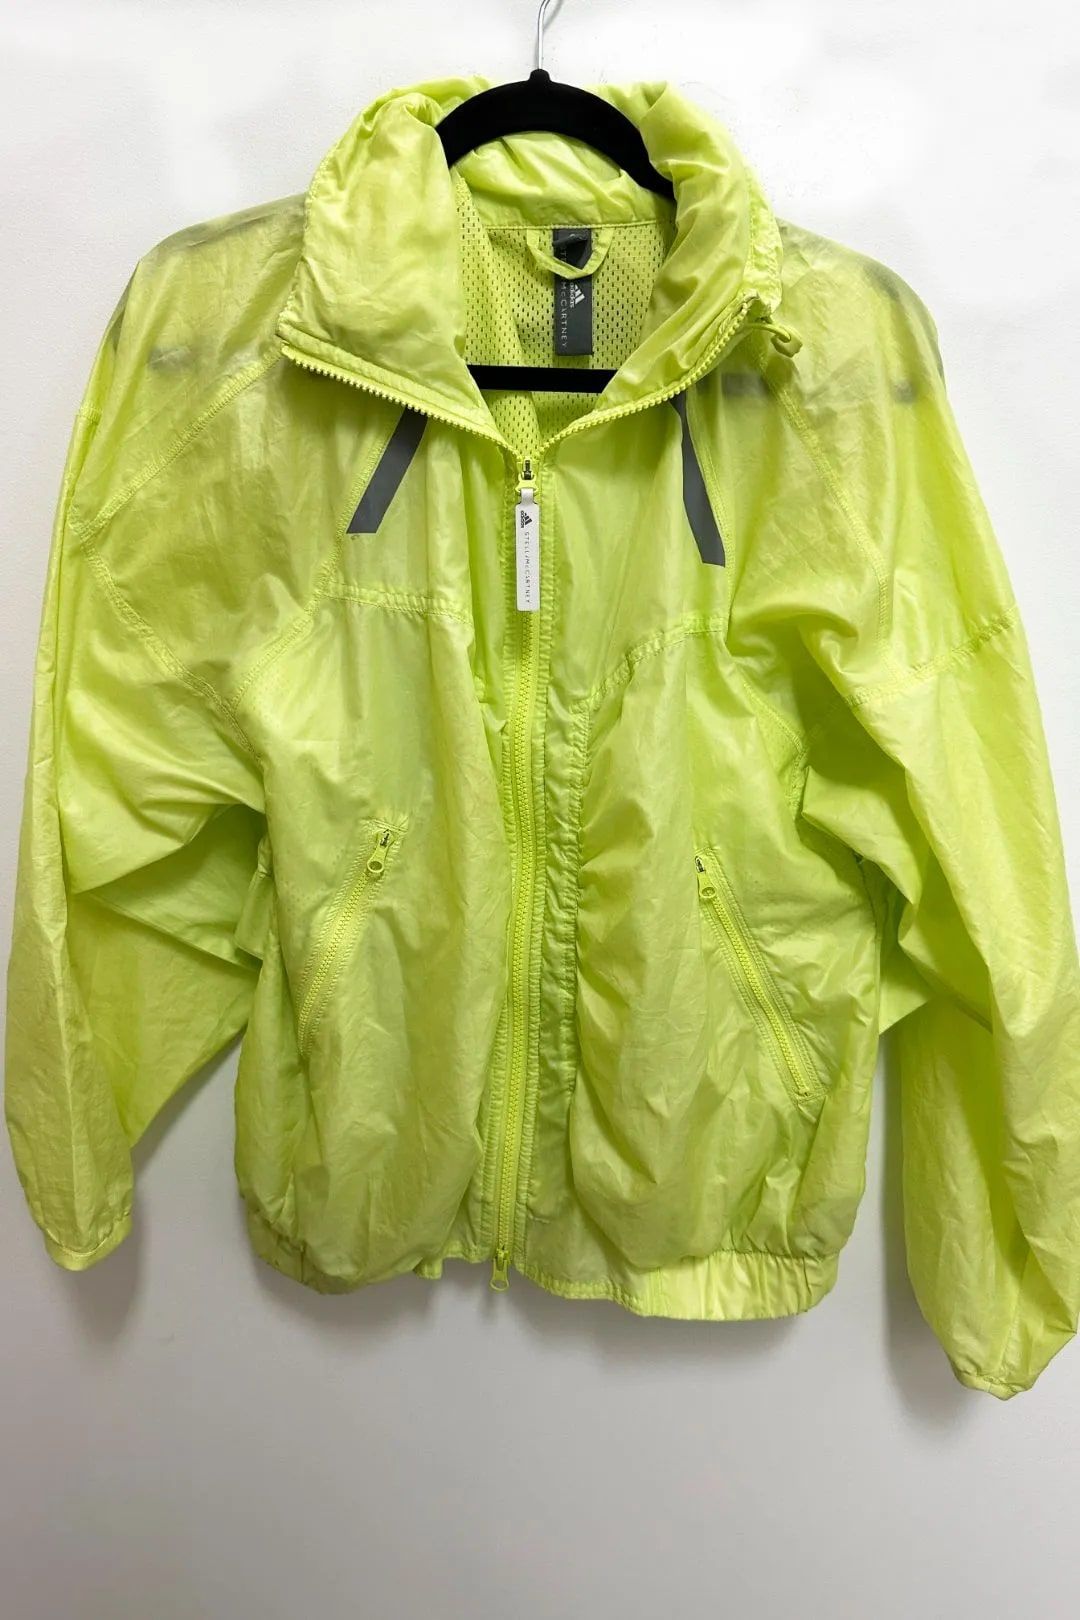 Buy the Neon Green Running Sports Jacket by Adidas by Stella McCartney for workouts